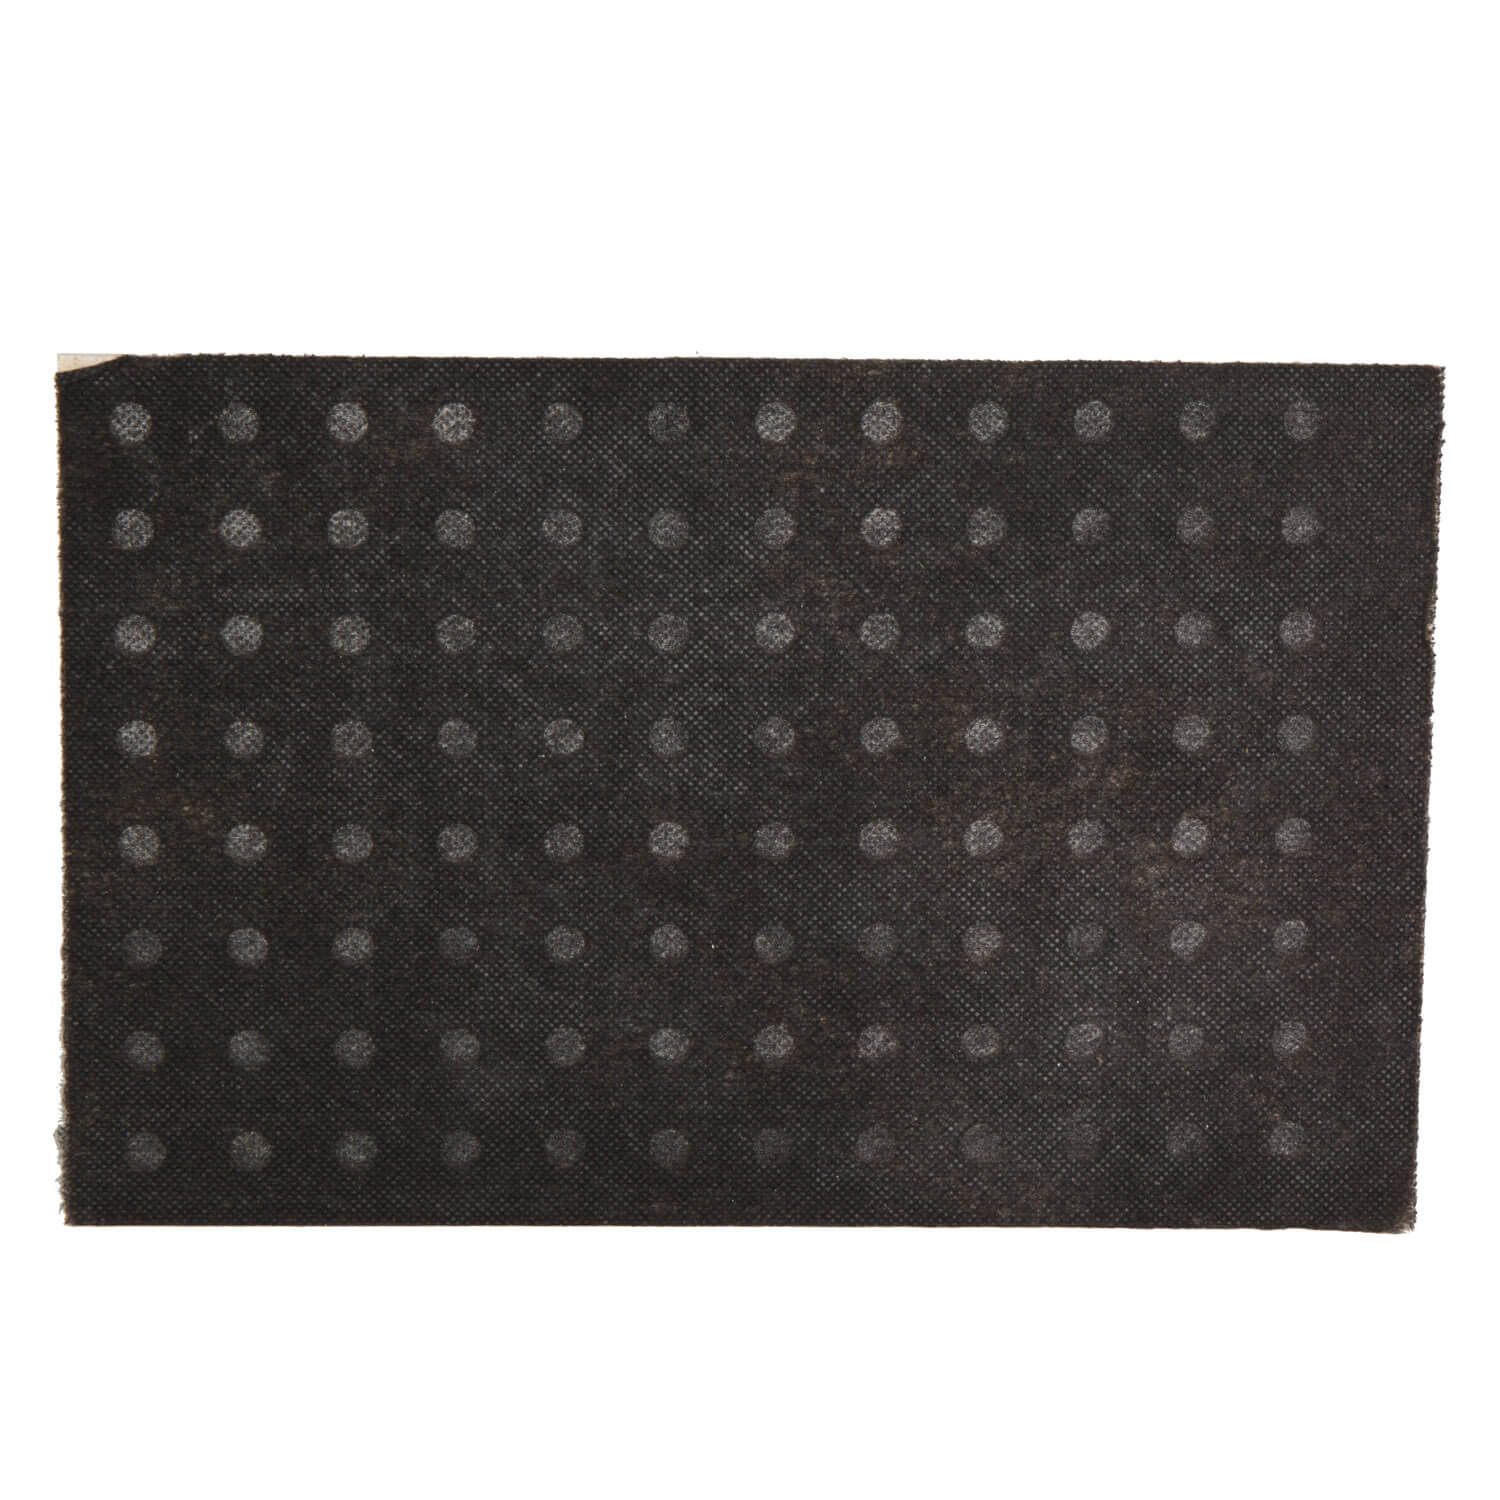 Perforated sound absorbing plate